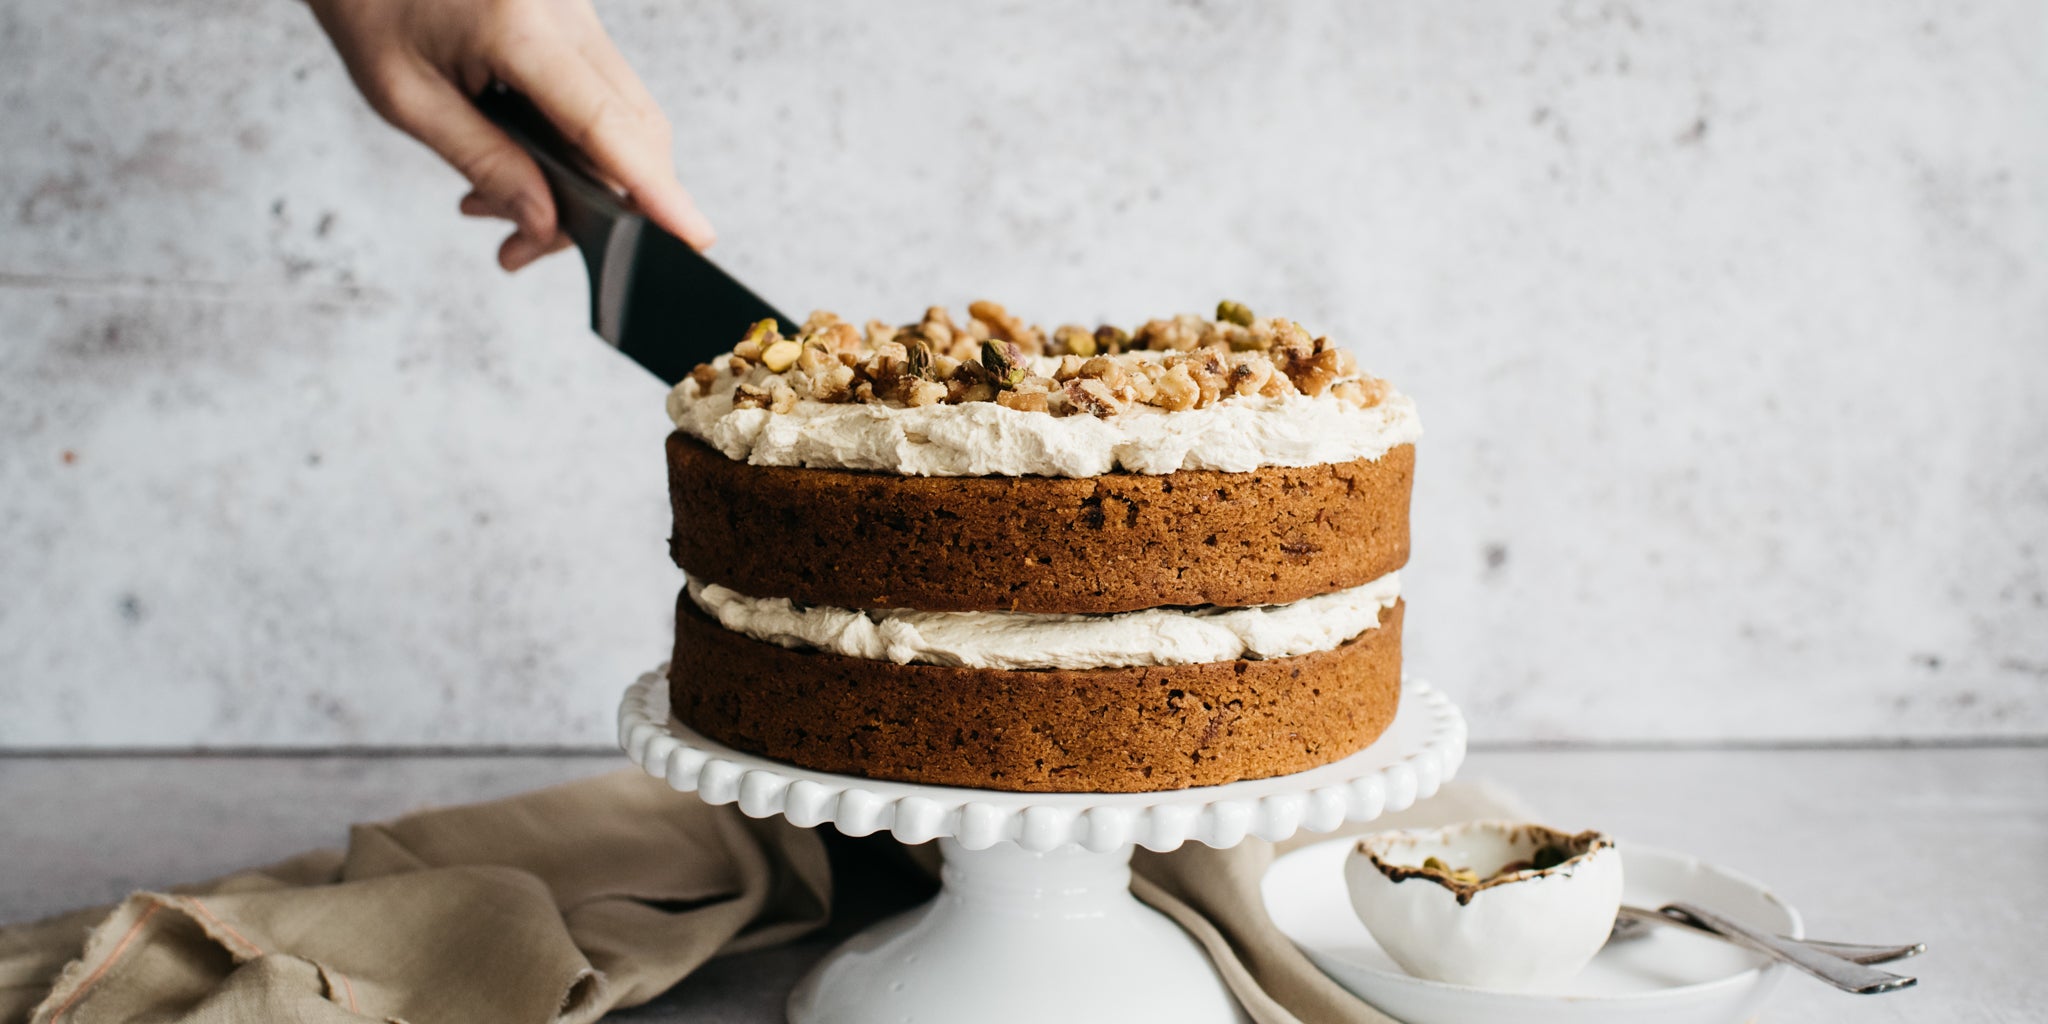 Vegan Carrot Cake being sliced with a hand holding a cake knife, topped with Billington's Golden Icing Sugar and chopped nuts